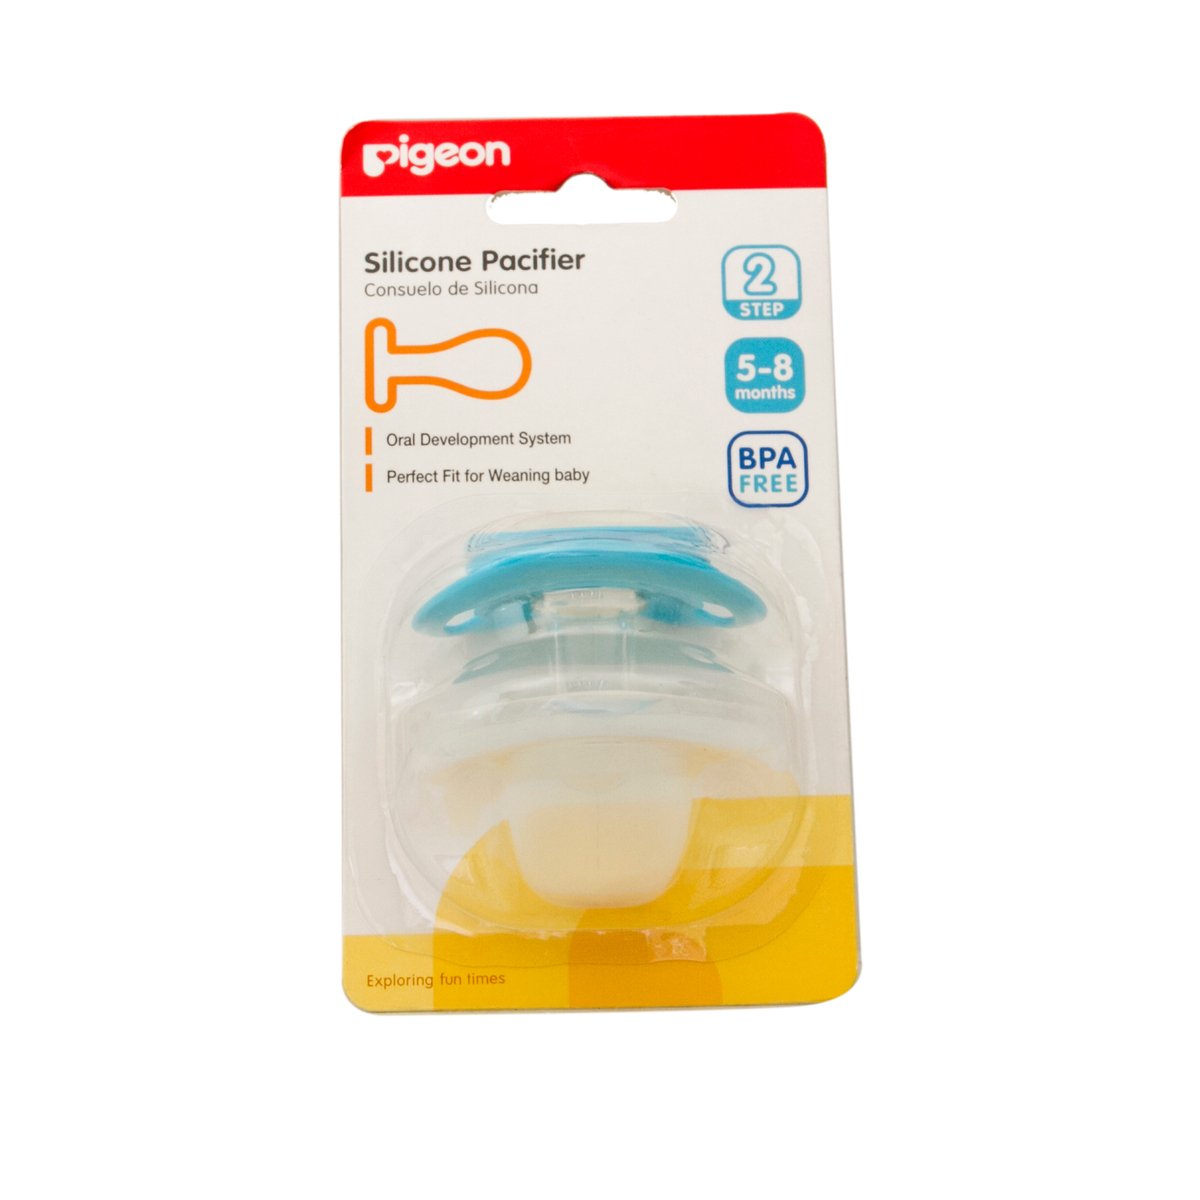 Pigeon Silicone Pacifier 1 pc